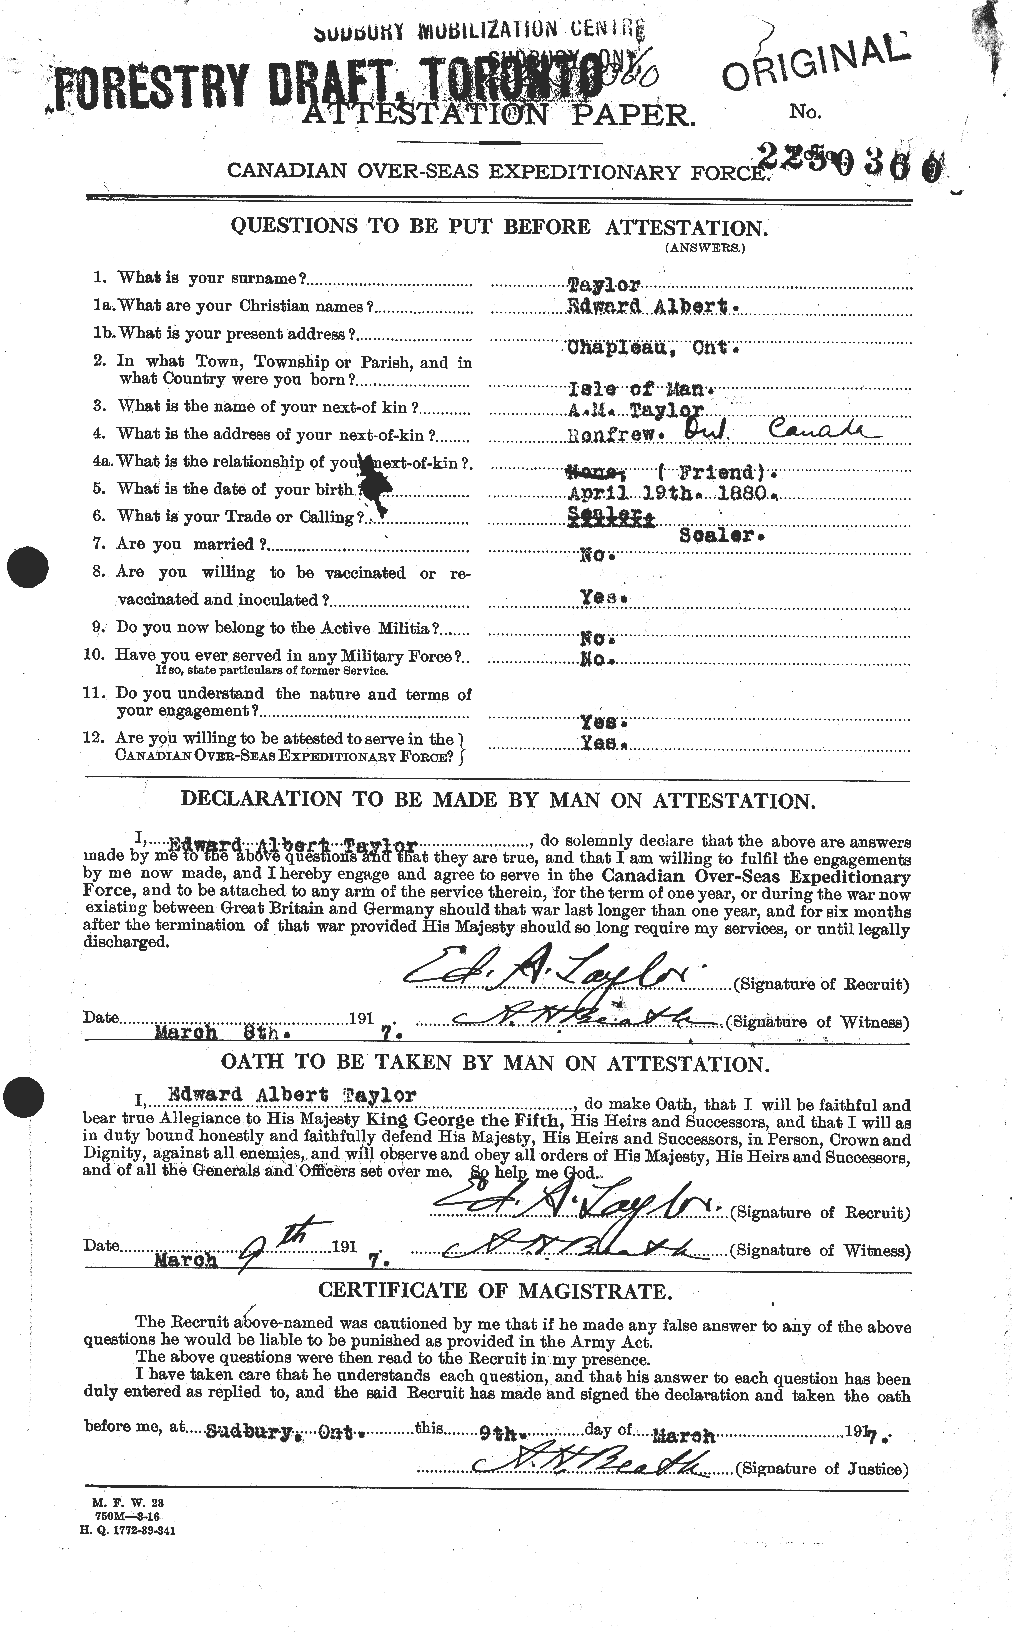 Personnel Records of the First World War - CEF 627298a